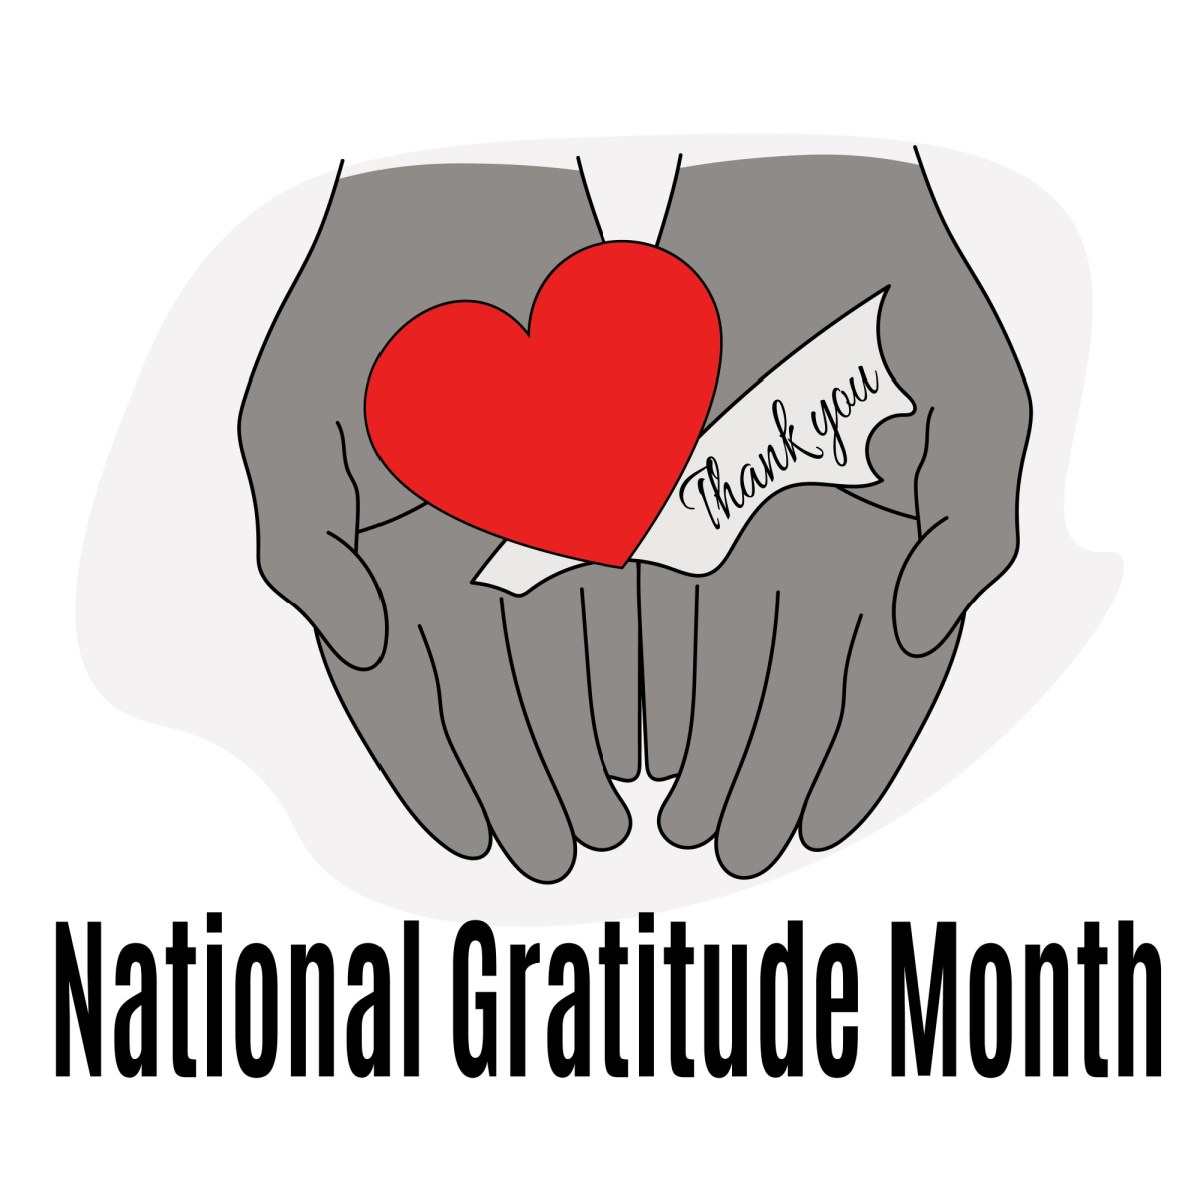 A black and white photo of hands holding a red heart and a piece of paper that reads "thank you" over a black text overlay for National Gratitude Month in November.